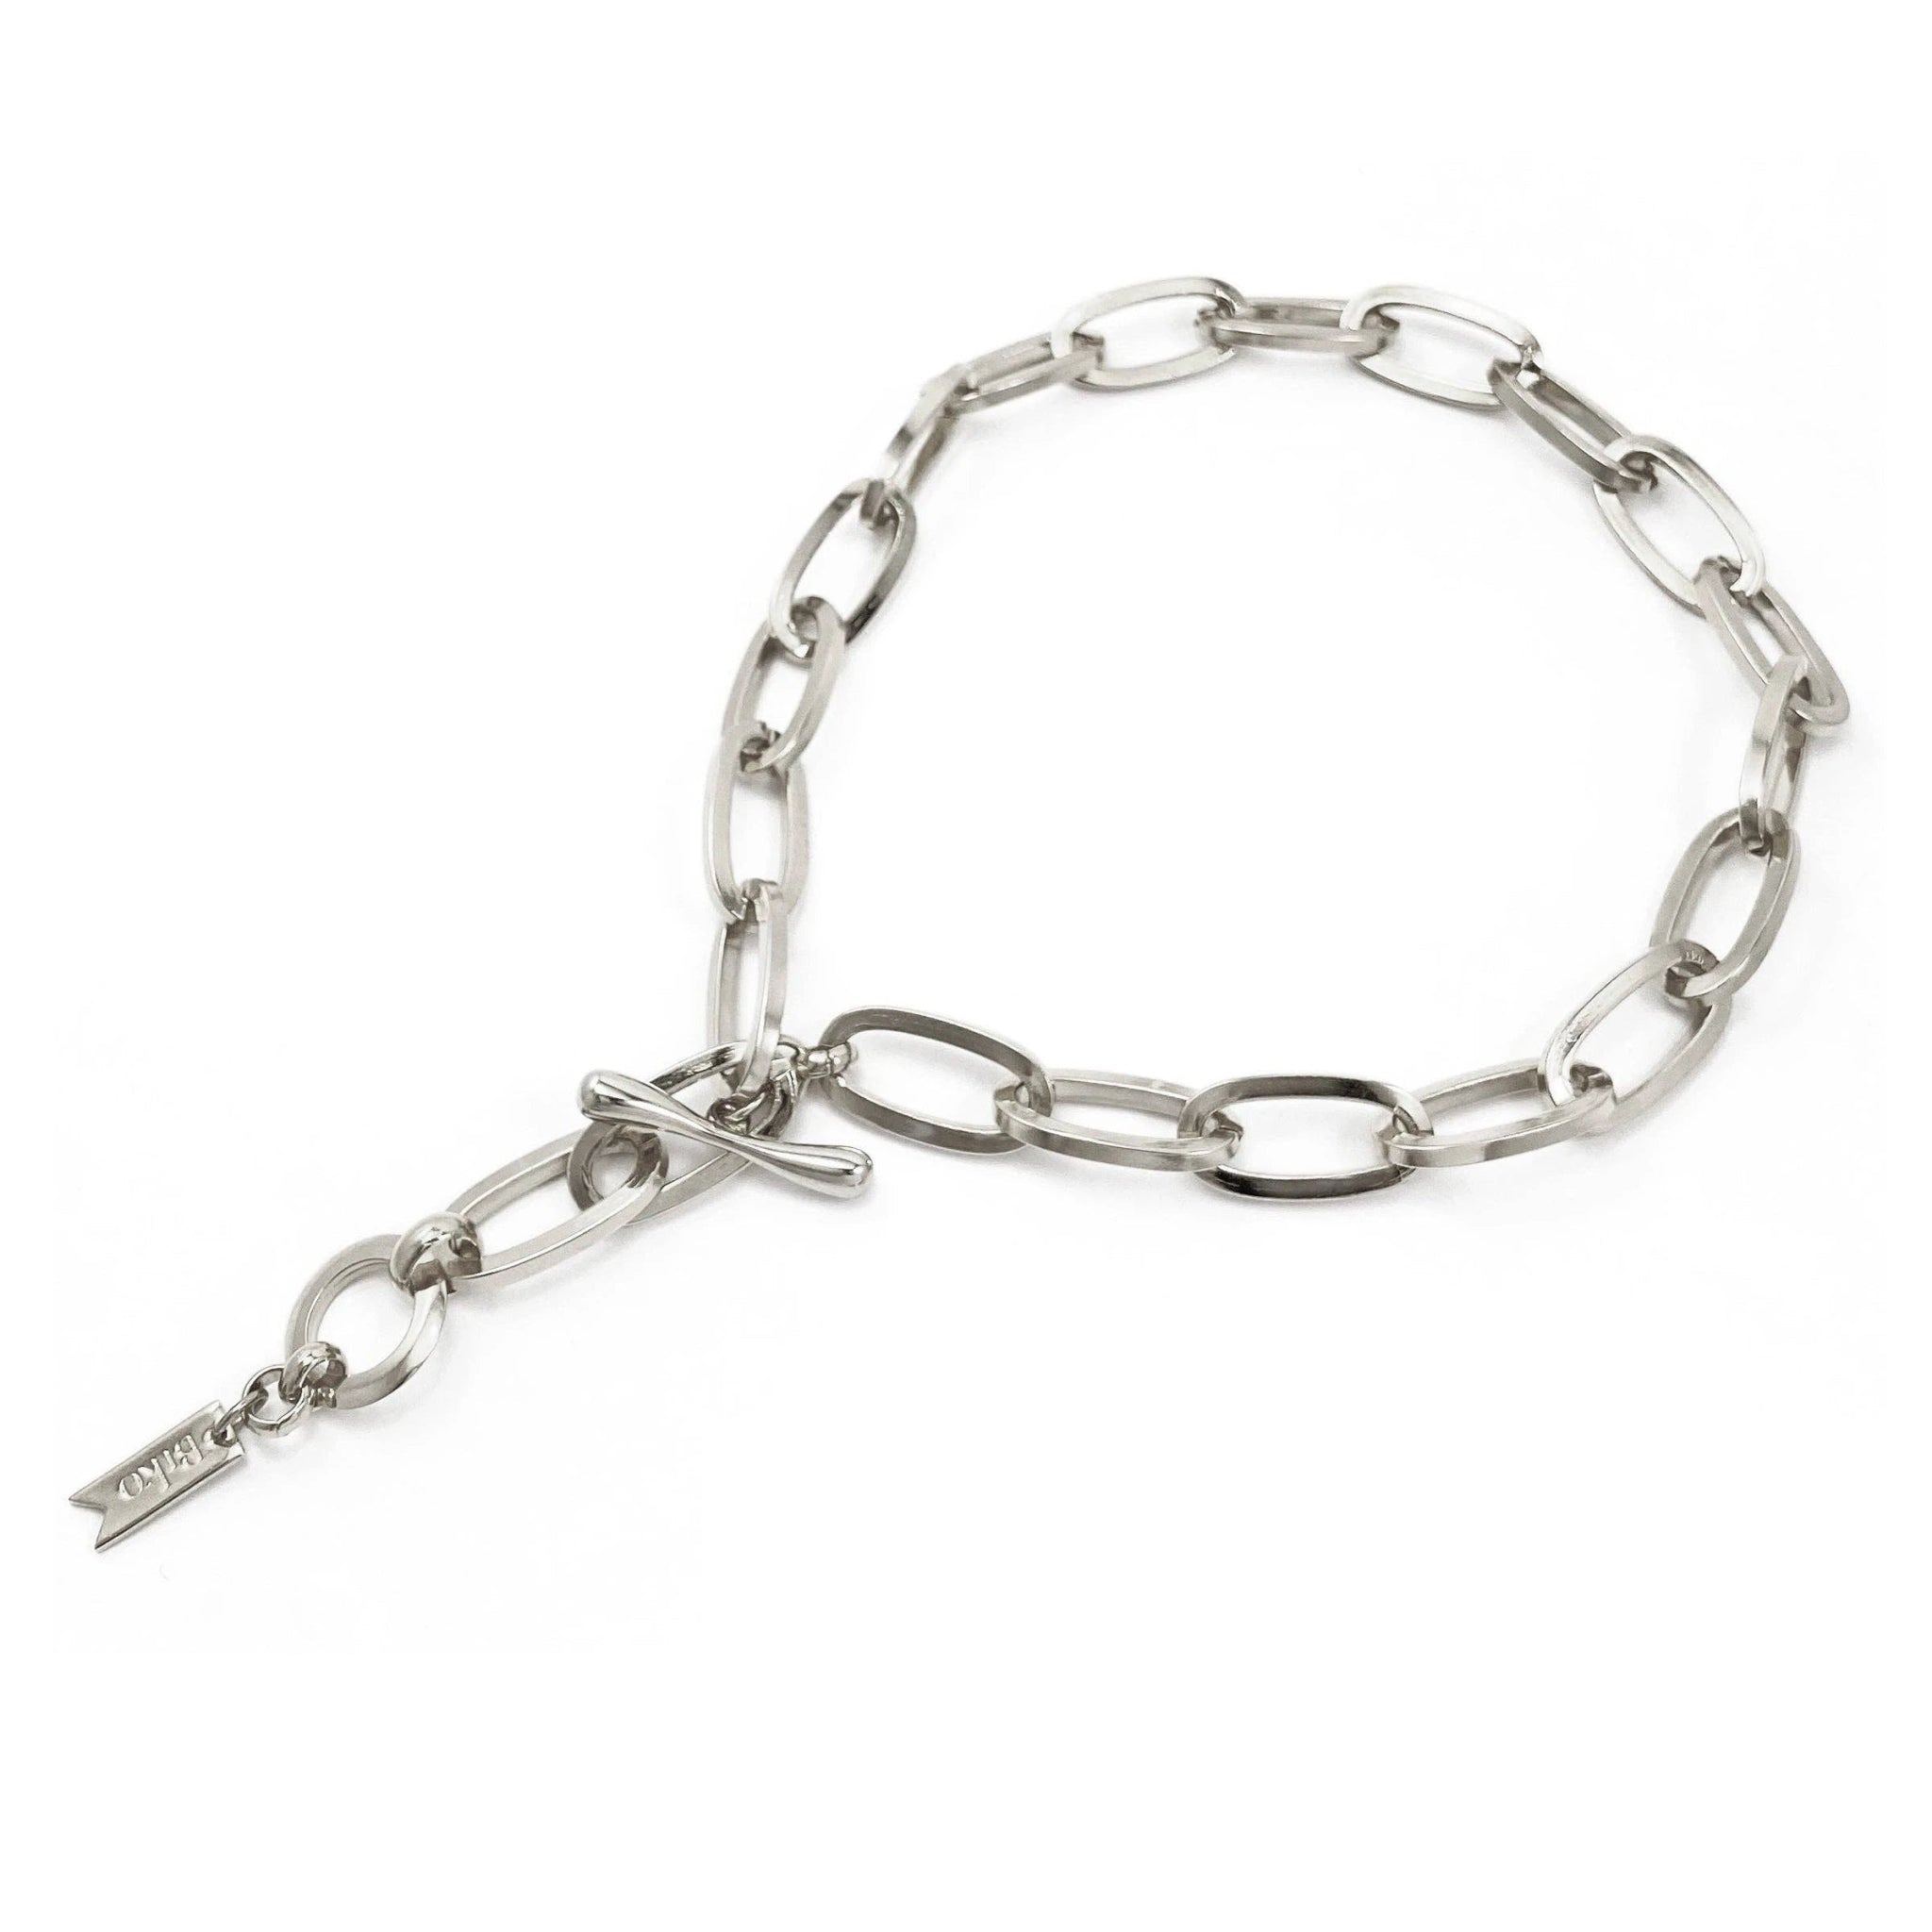 Essential Chainlink Silver Collar Necklace - L'Atelier Global